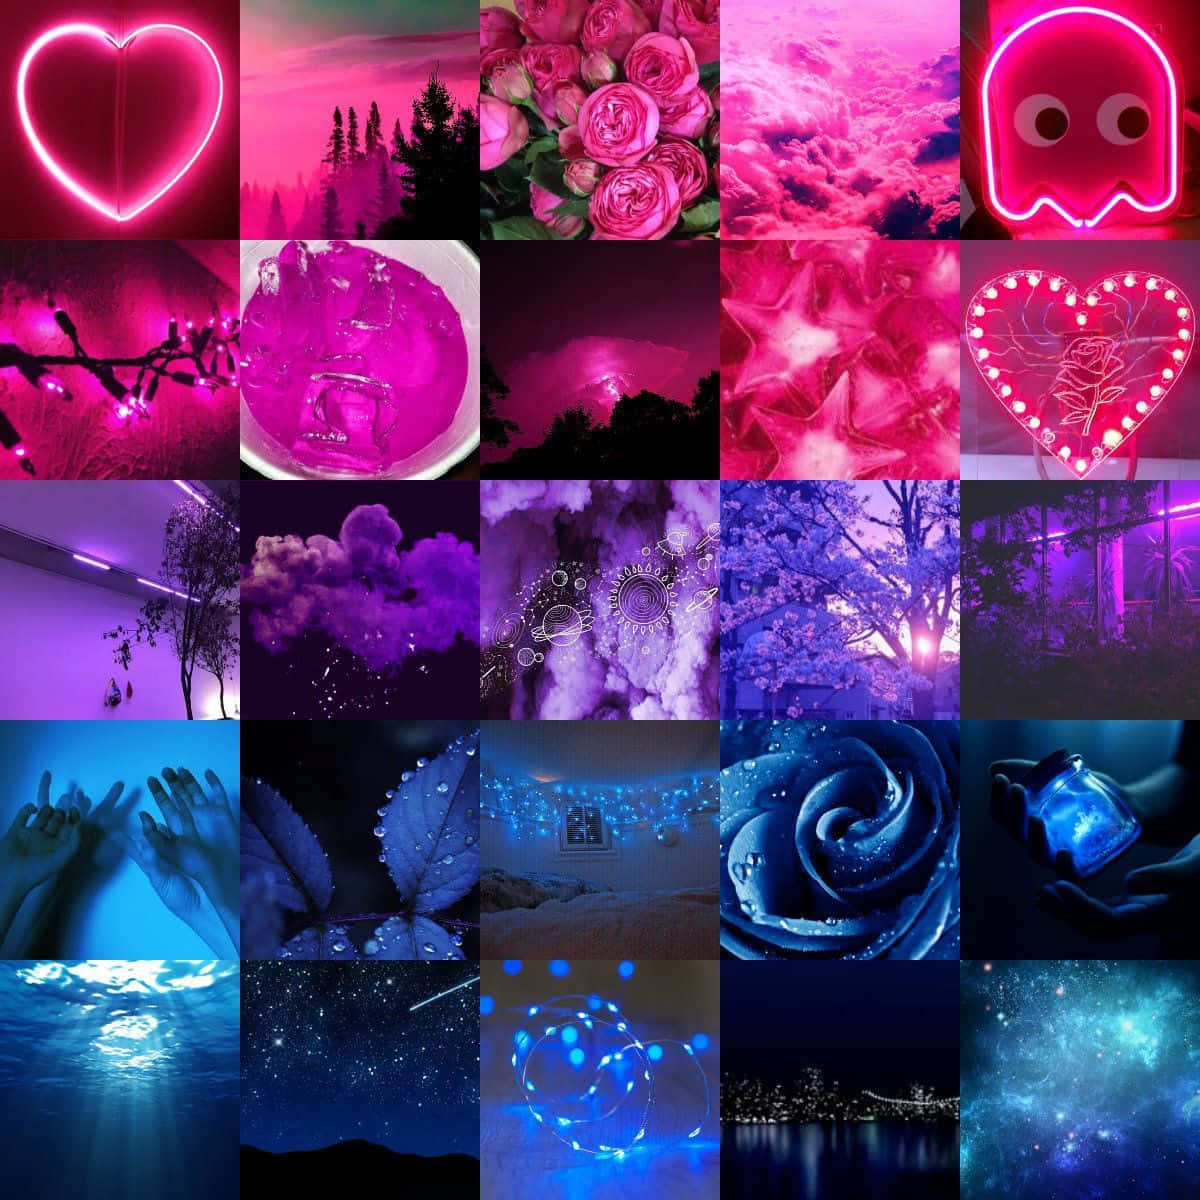 A Collage Of Pictures Of Blue And Purple